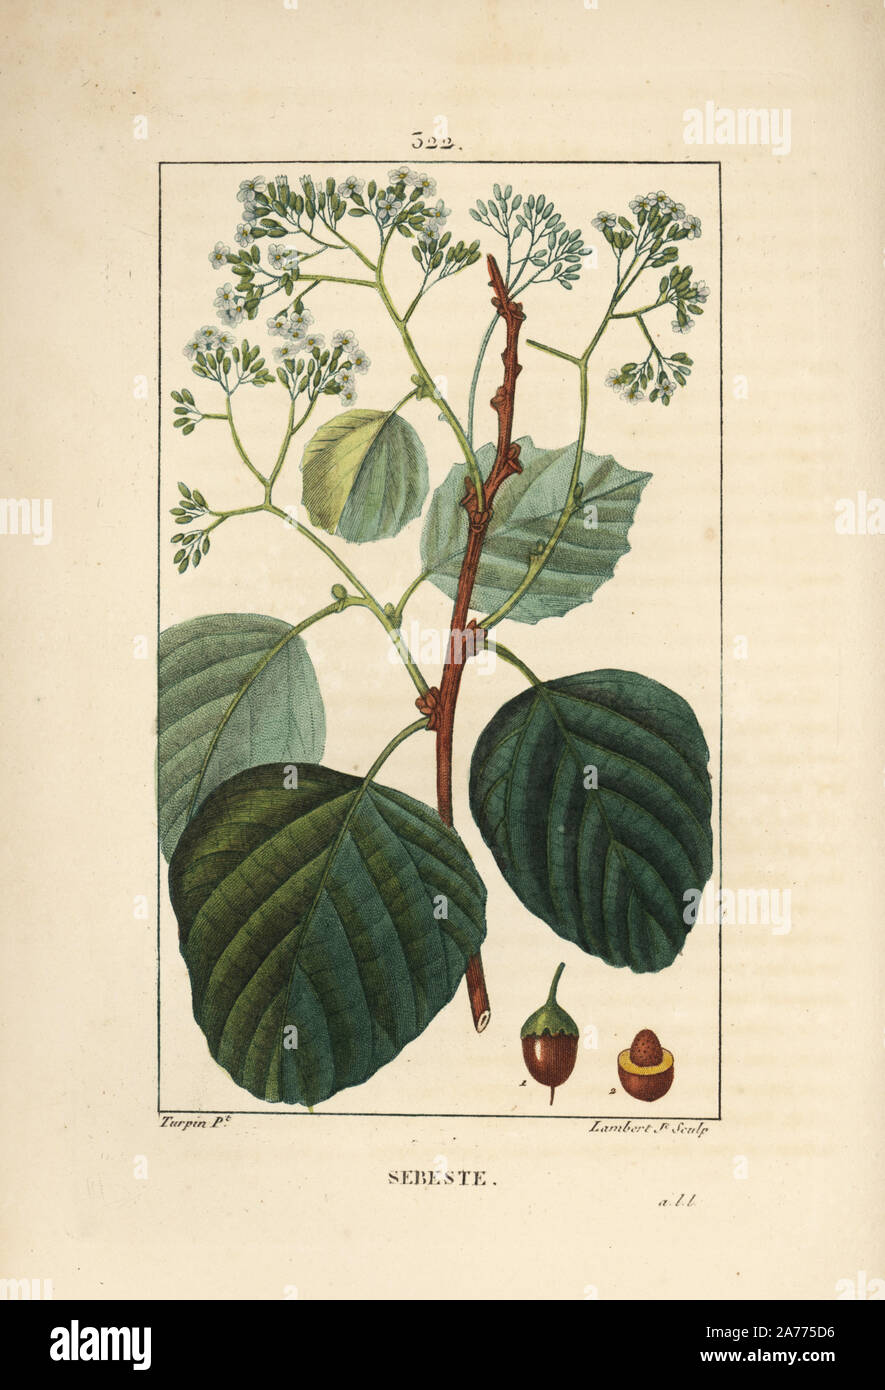 Assyrian plum or lasura, Cordia myxa, with flower, leaf, stalk and fruit. Handcoloured stipple copperplate engraving by Lambert Junior from a drawing by Pierre Jean-Francois Turpin from Chaumeton, Poiret and Chamberet's 'La Flore Medicale,' Paris, Panckoucke, 1830. Turpin (17751840) was one of the three giants of French botanical art of the era alongside Pierre Joseph Redoute and Pancrace Bessa. Stock Photo